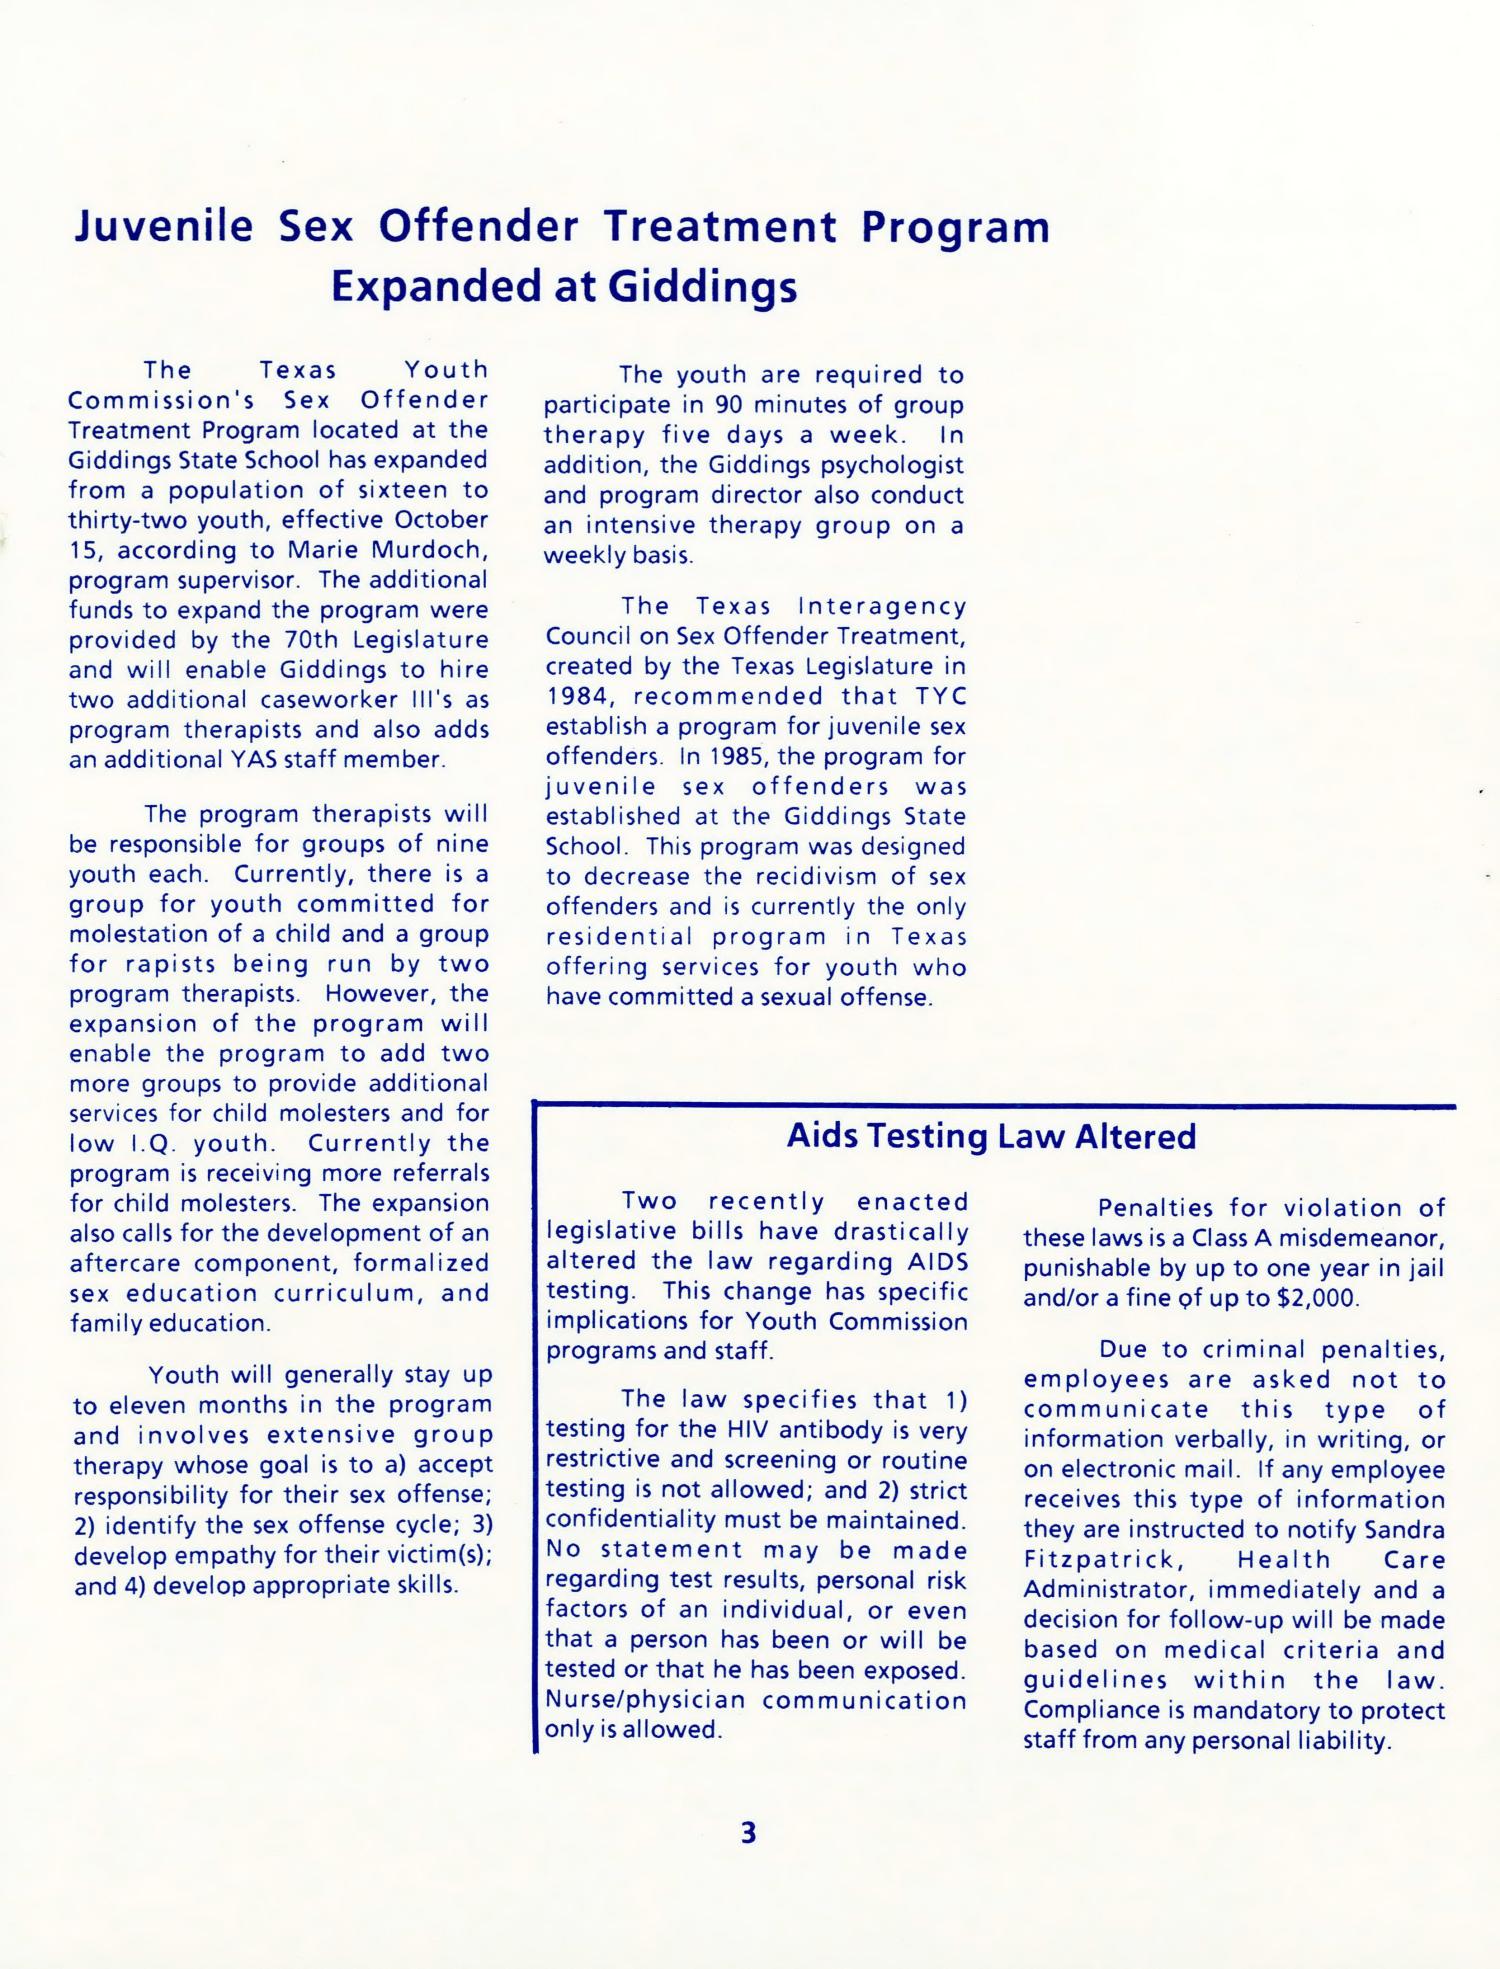 Texas Youth Commission Notes, Fall 1987
                                                
                                                    3
                                                